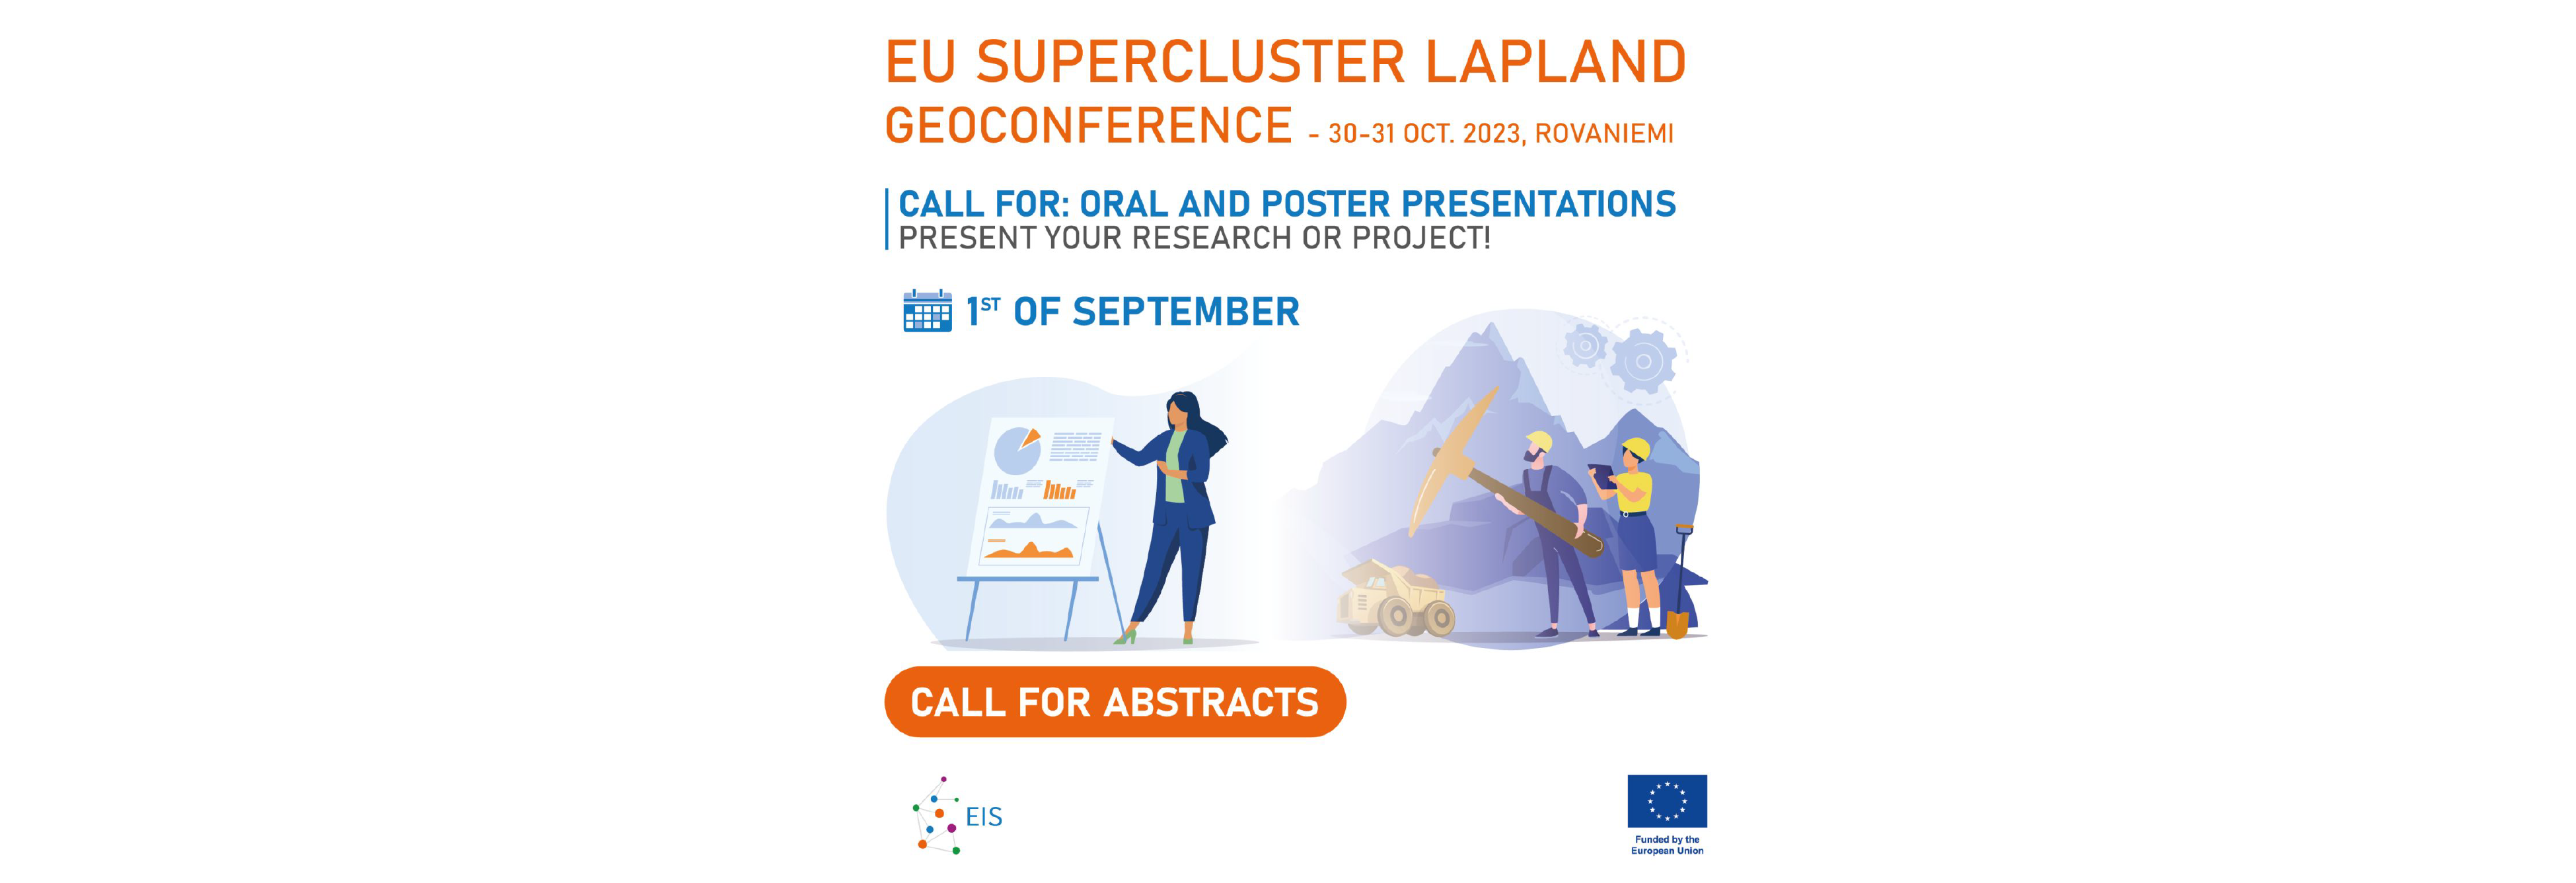 Join the EU SuperCluster Geoconference in Lapland